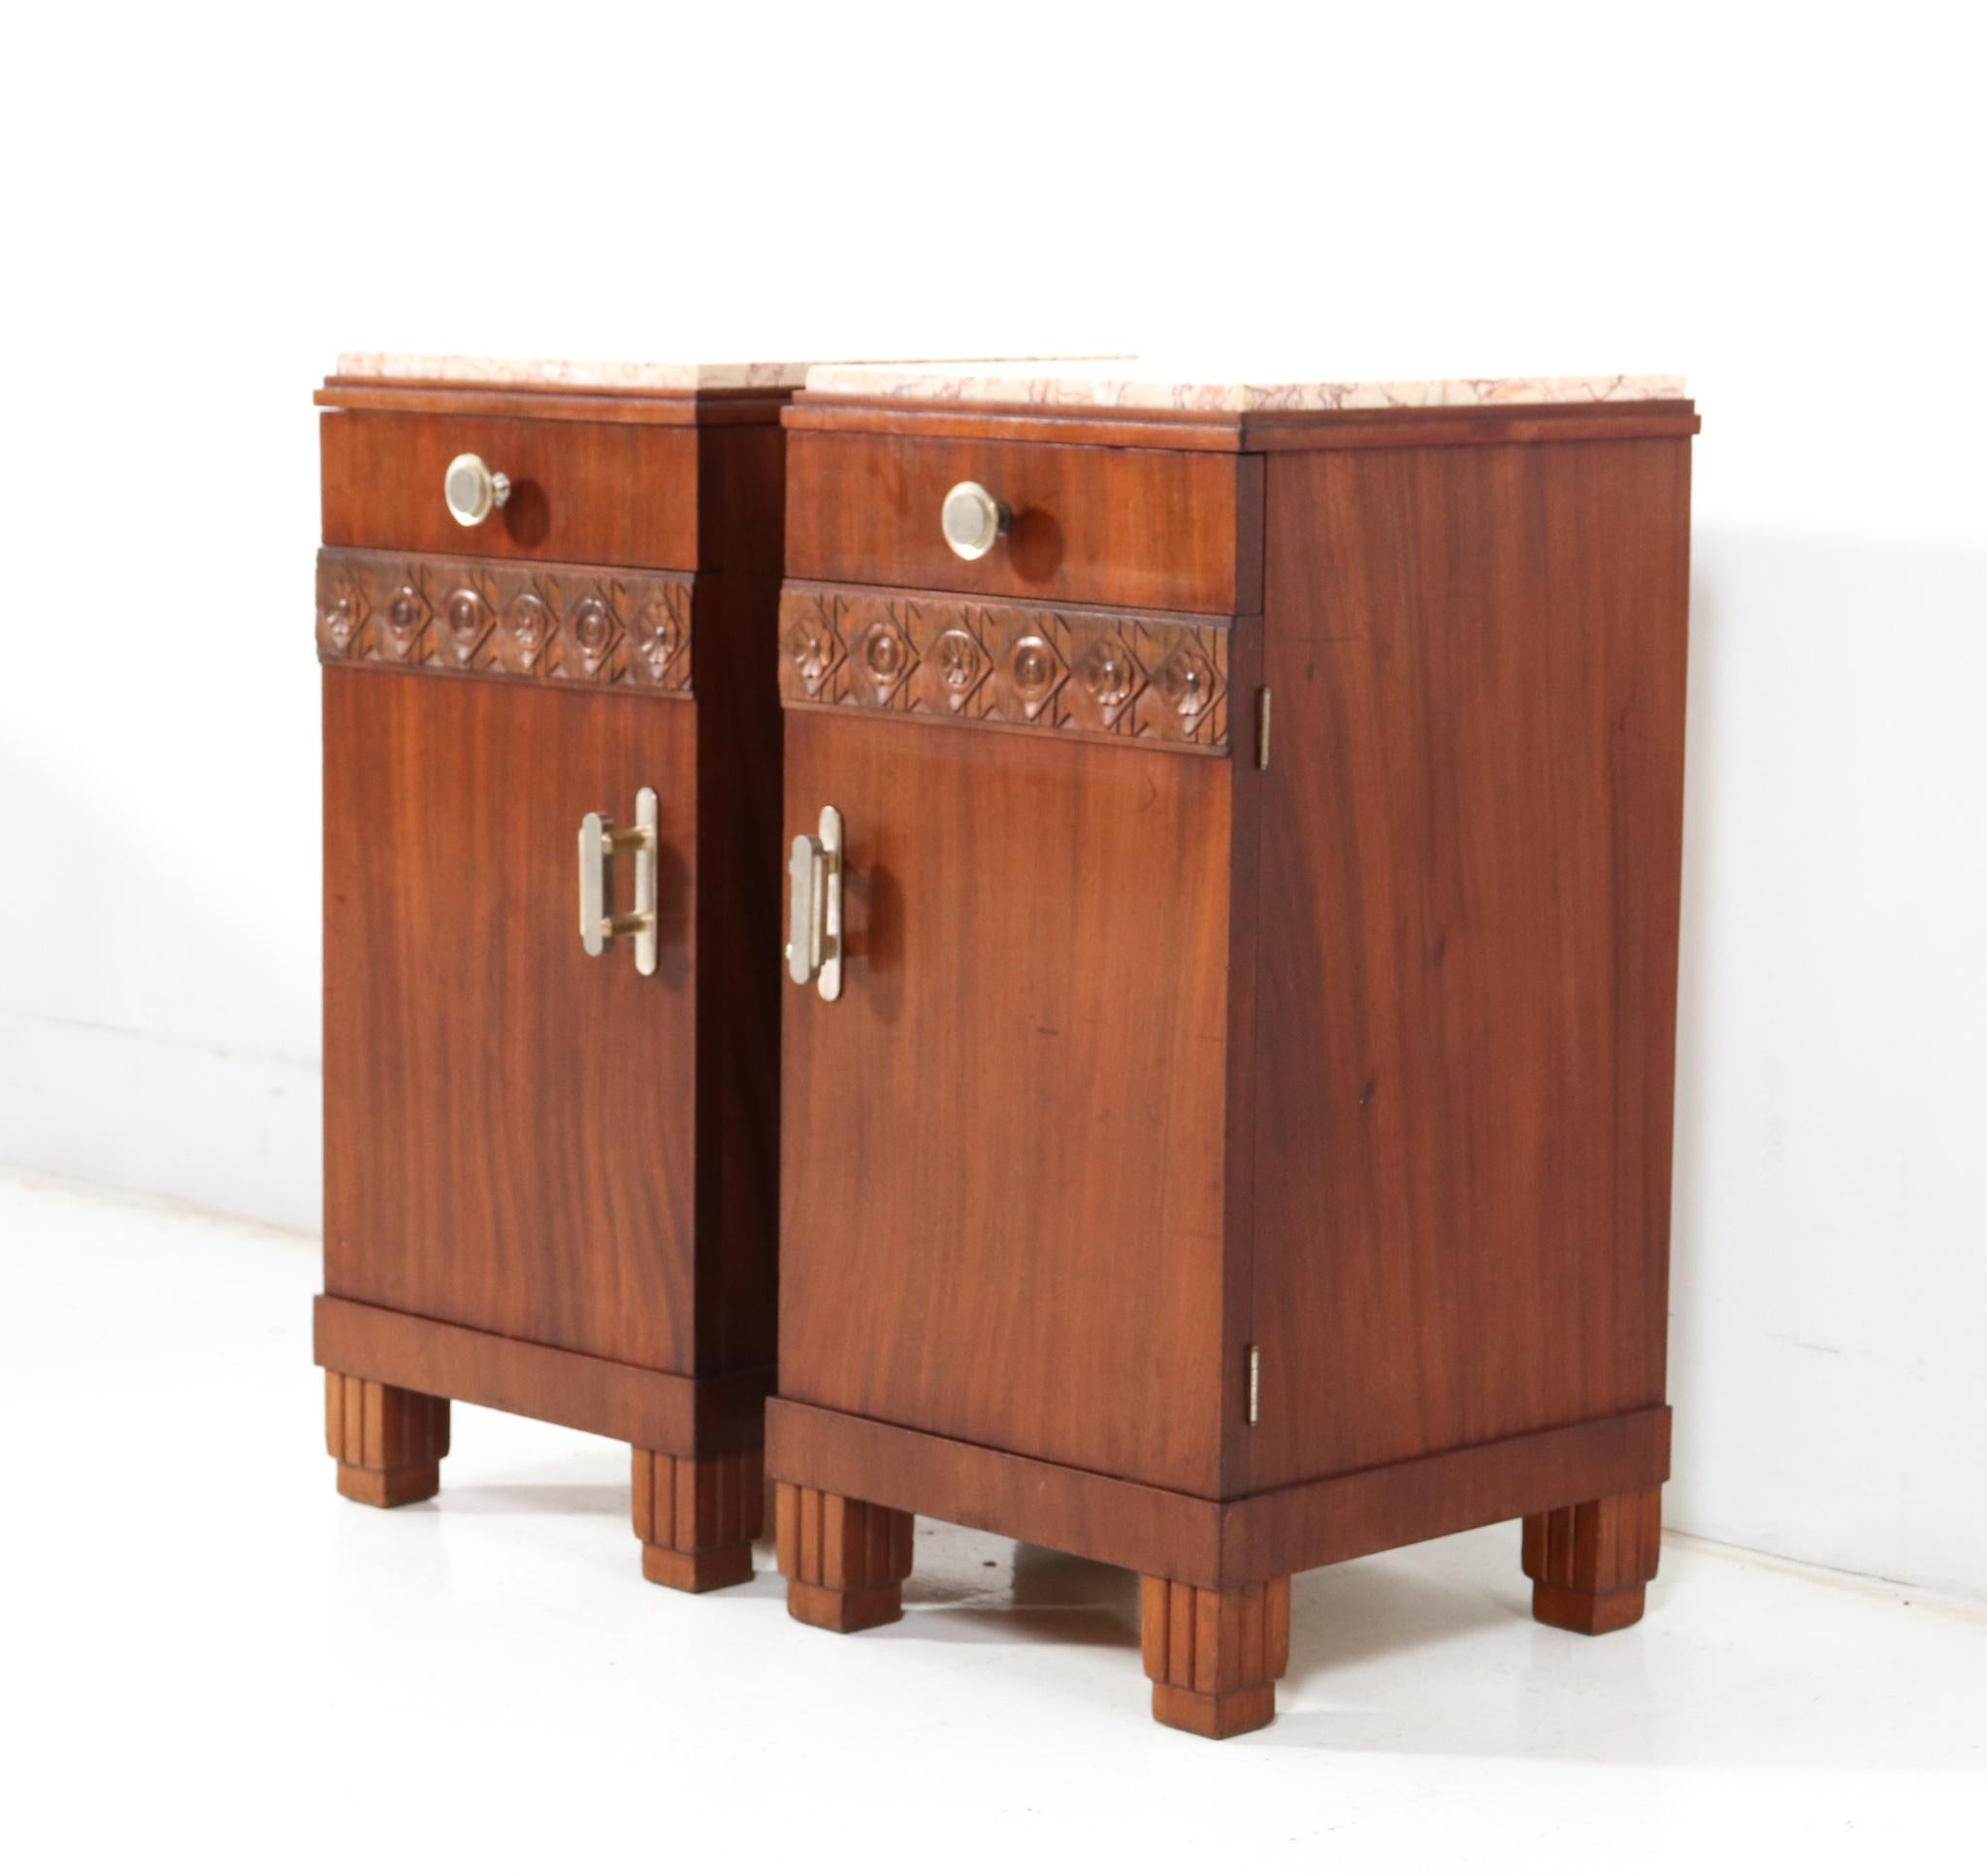 Chrome Two Walnut Art Deco Nightstands or Bedside Tables, 1930s For Sale